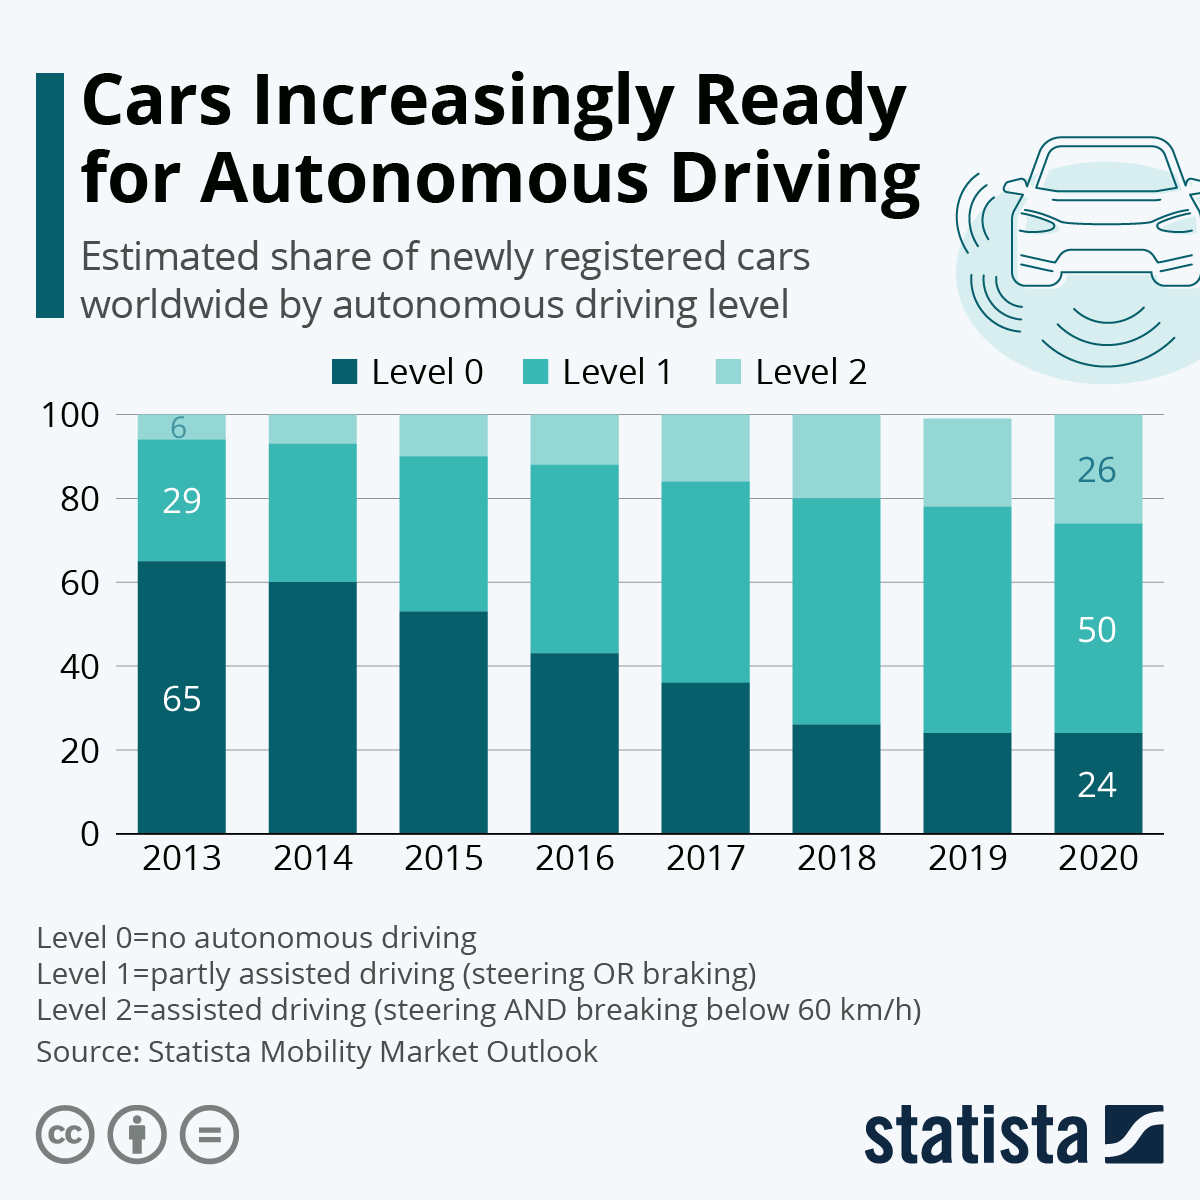 Cars Increasingly Ready for Autonomous Driving